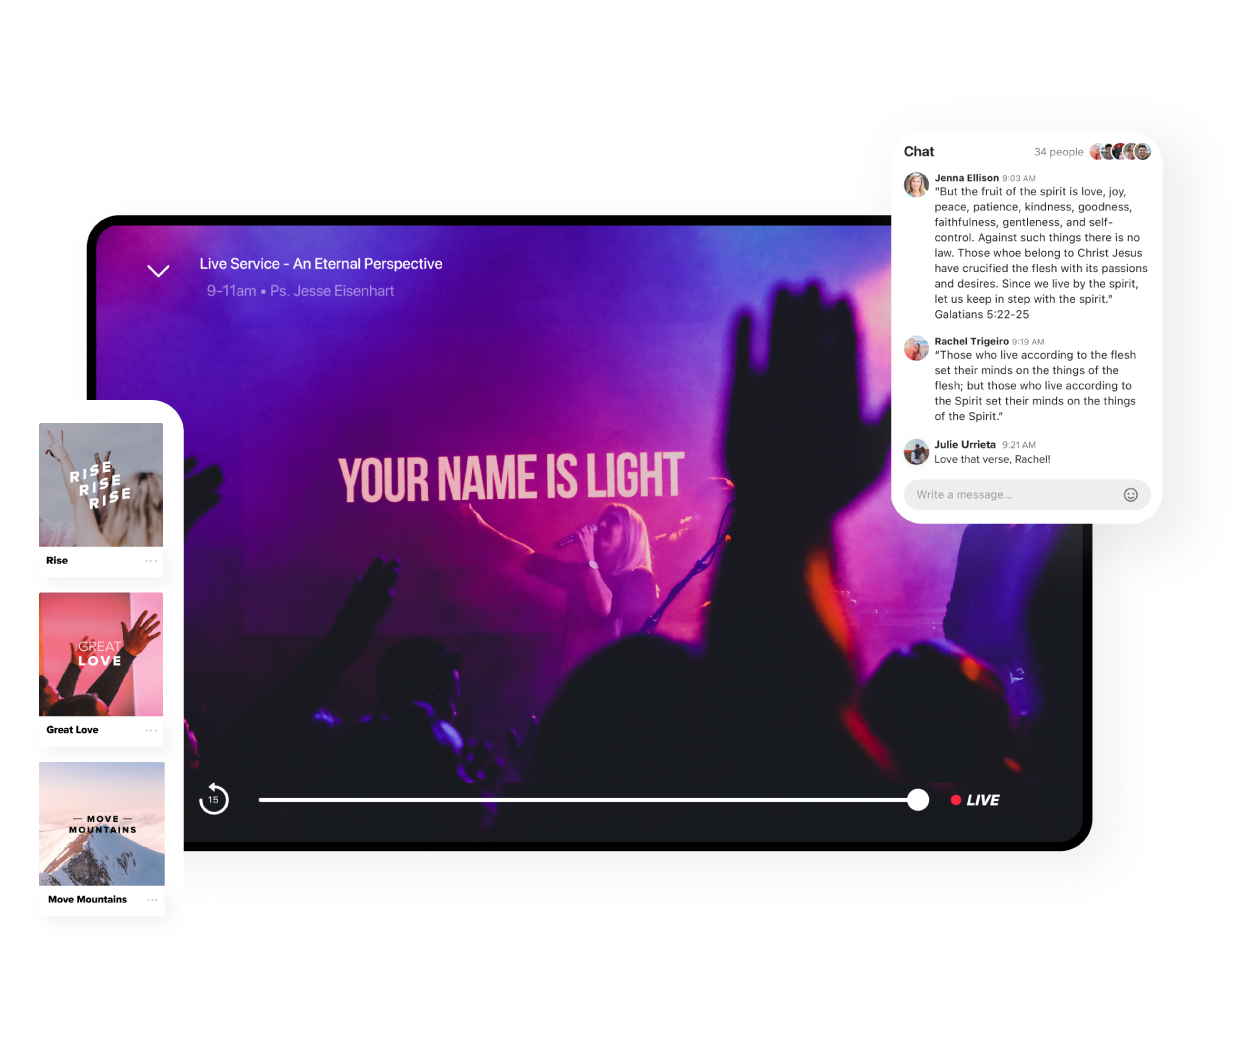 Amplify your message with the ultimate church media platform, featuring live streaming with chat, end-to-end media workflow & publishing, personalized media recommendations, no ads or distractions, analytics, and so much more!